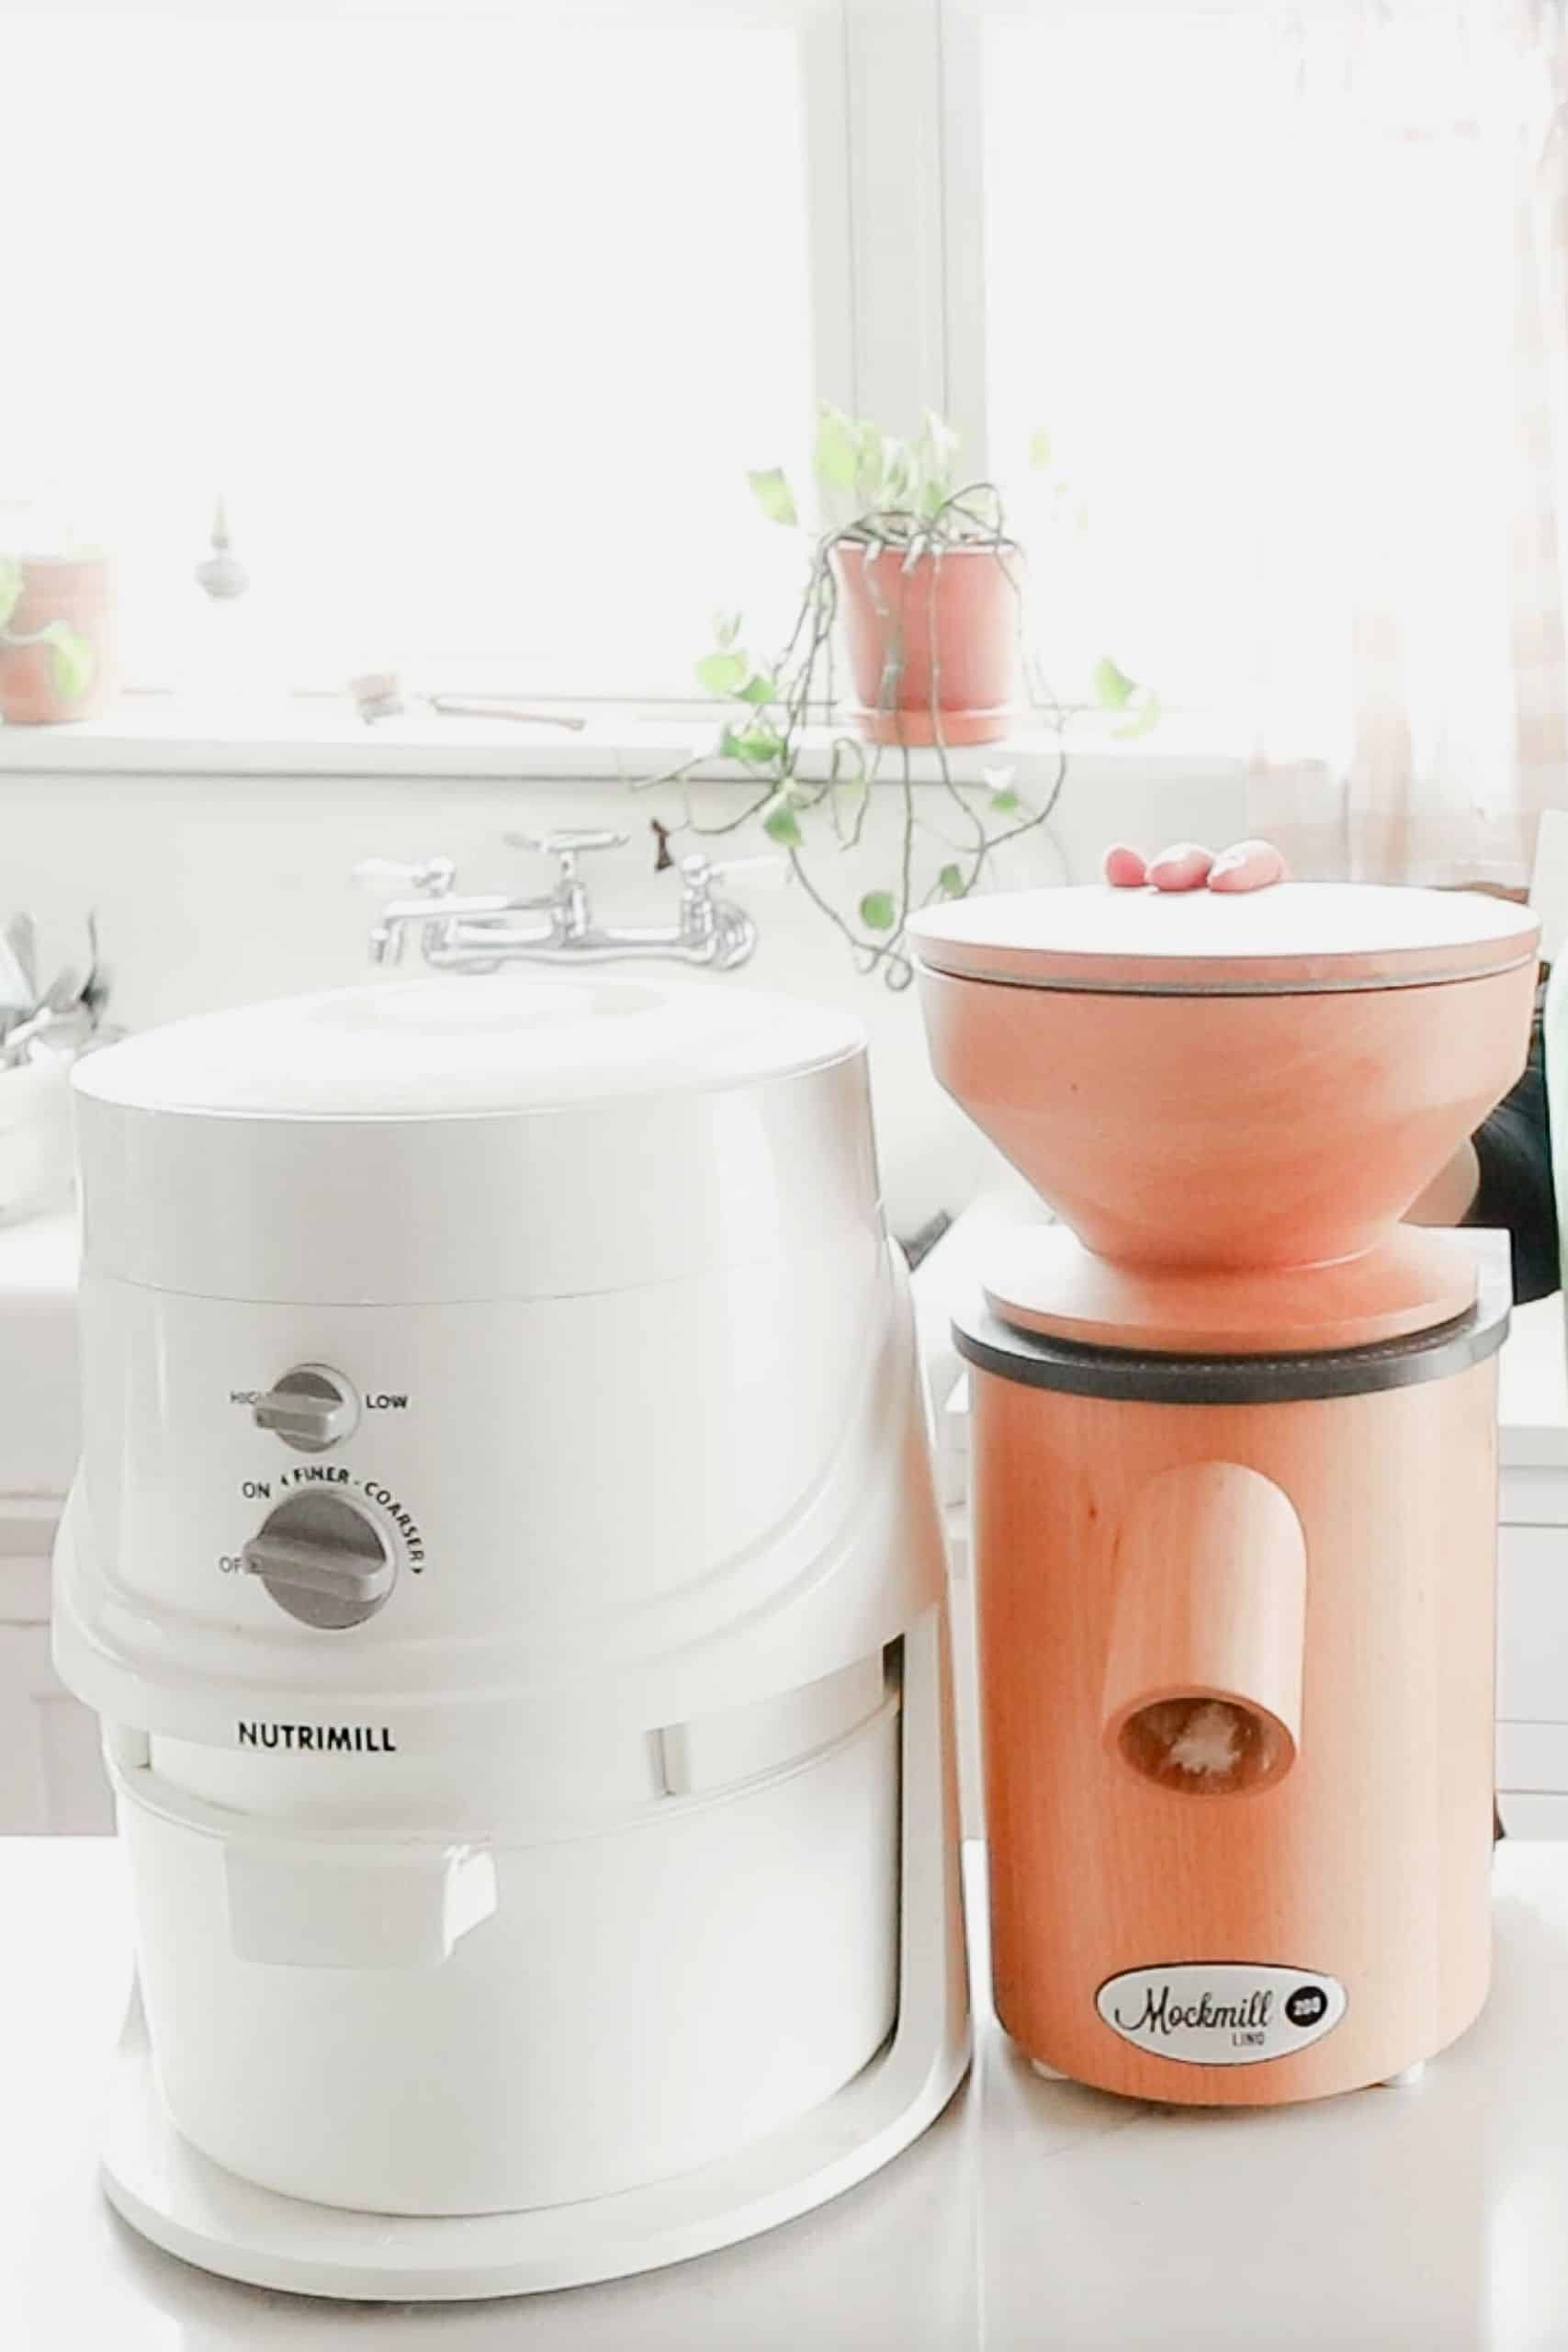 nutrimill and mockmill mills on a white countertop